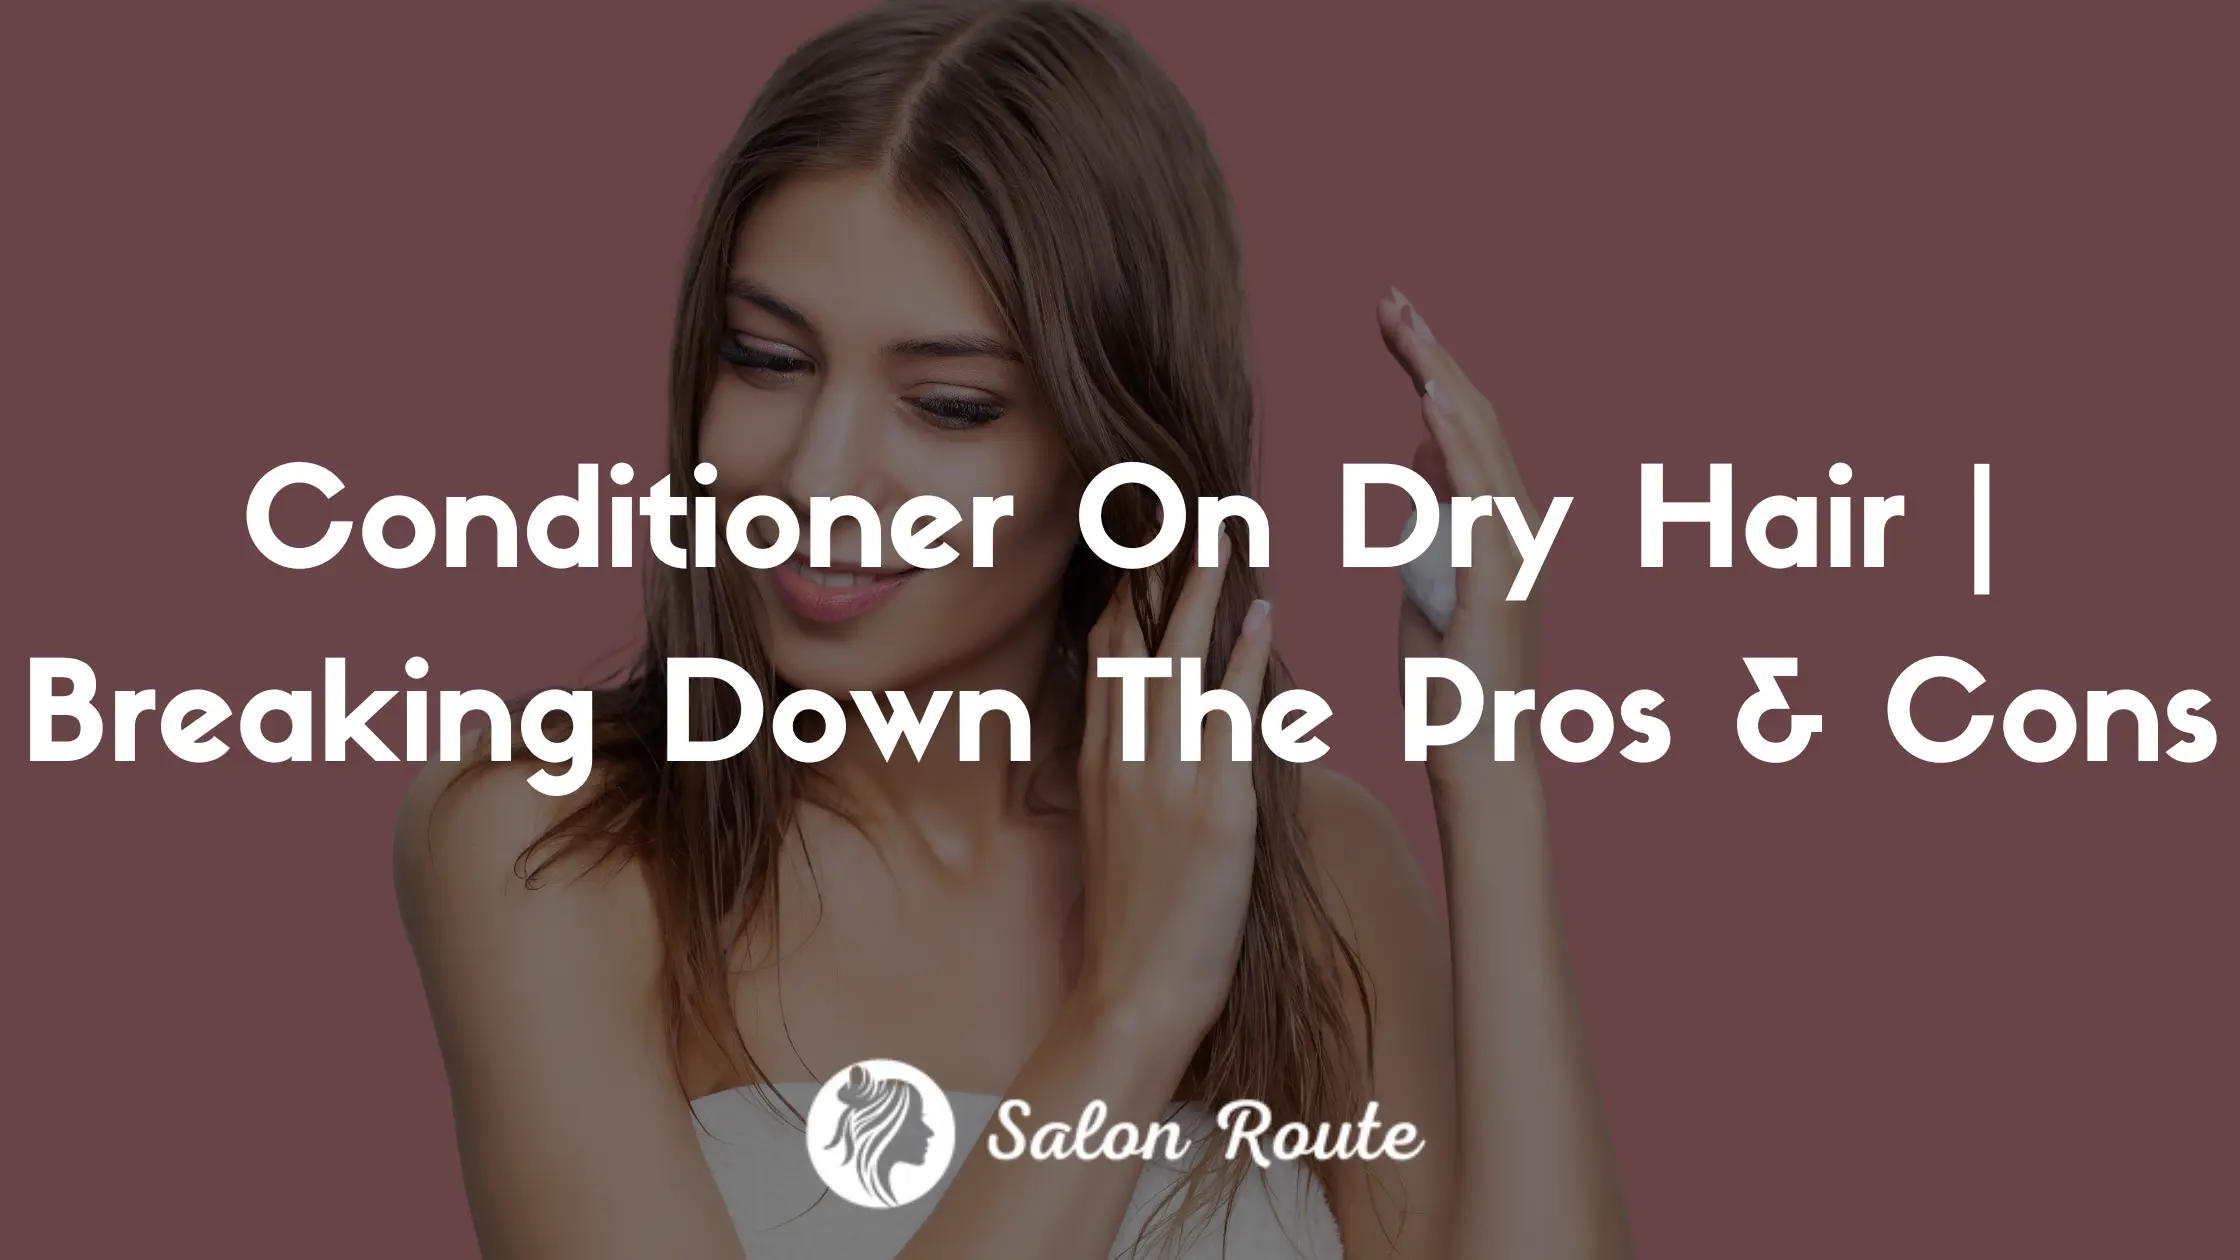 Conditioner On Dry Hair | Breaking Down The Pros & Cons